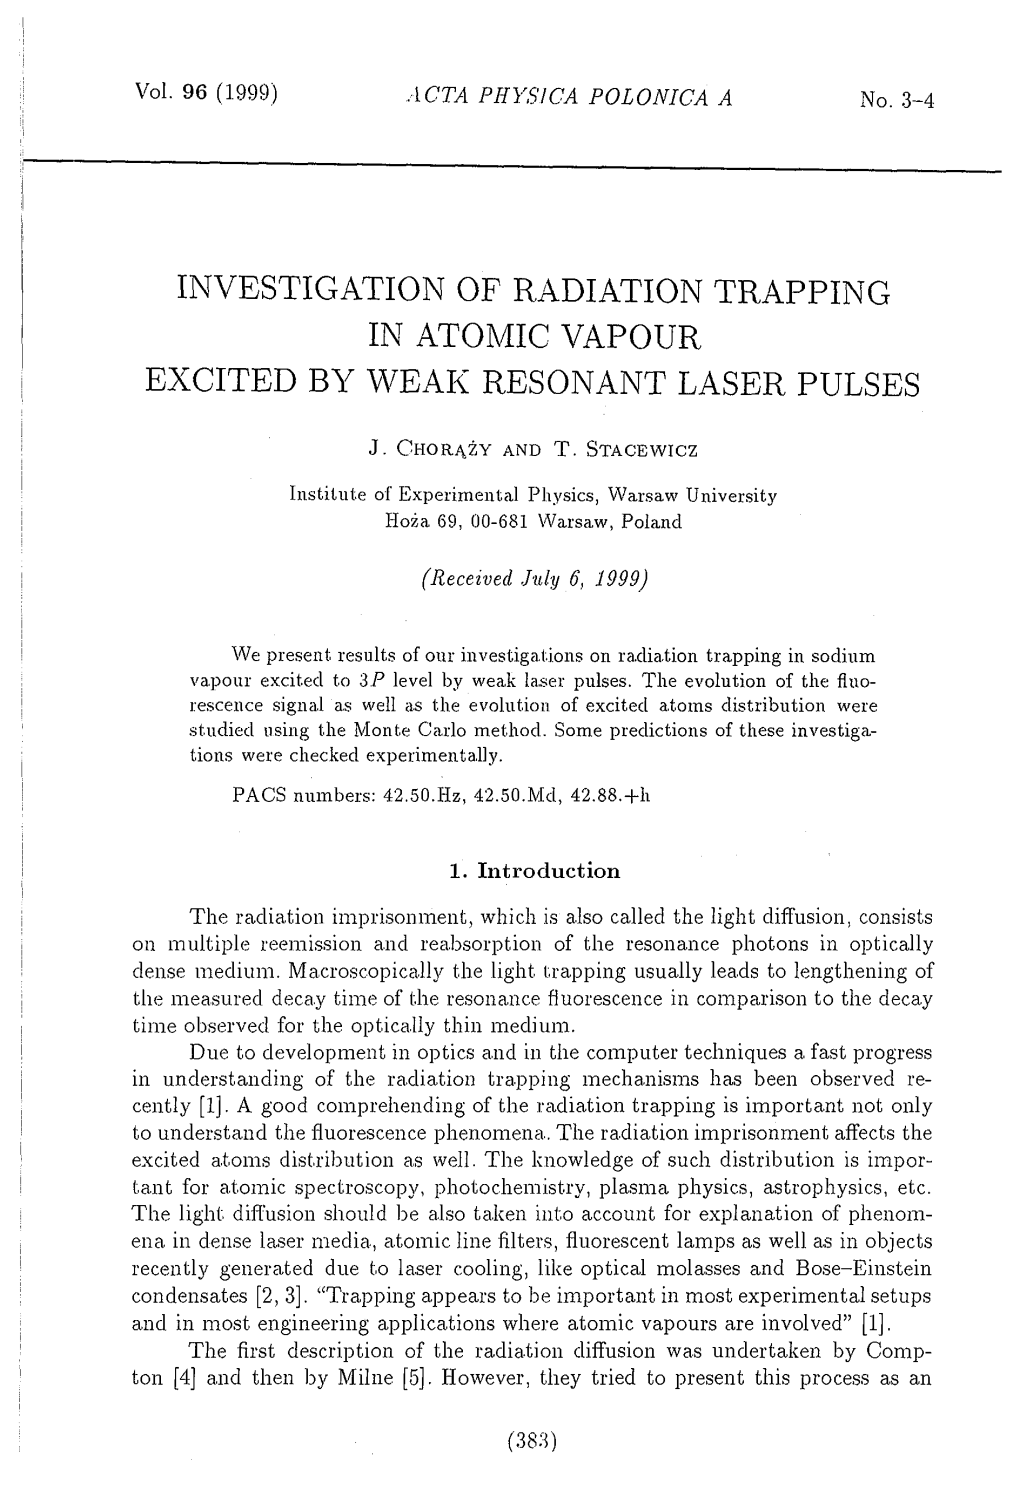 Investigation of Radiation Trapping in Atomic Vapour